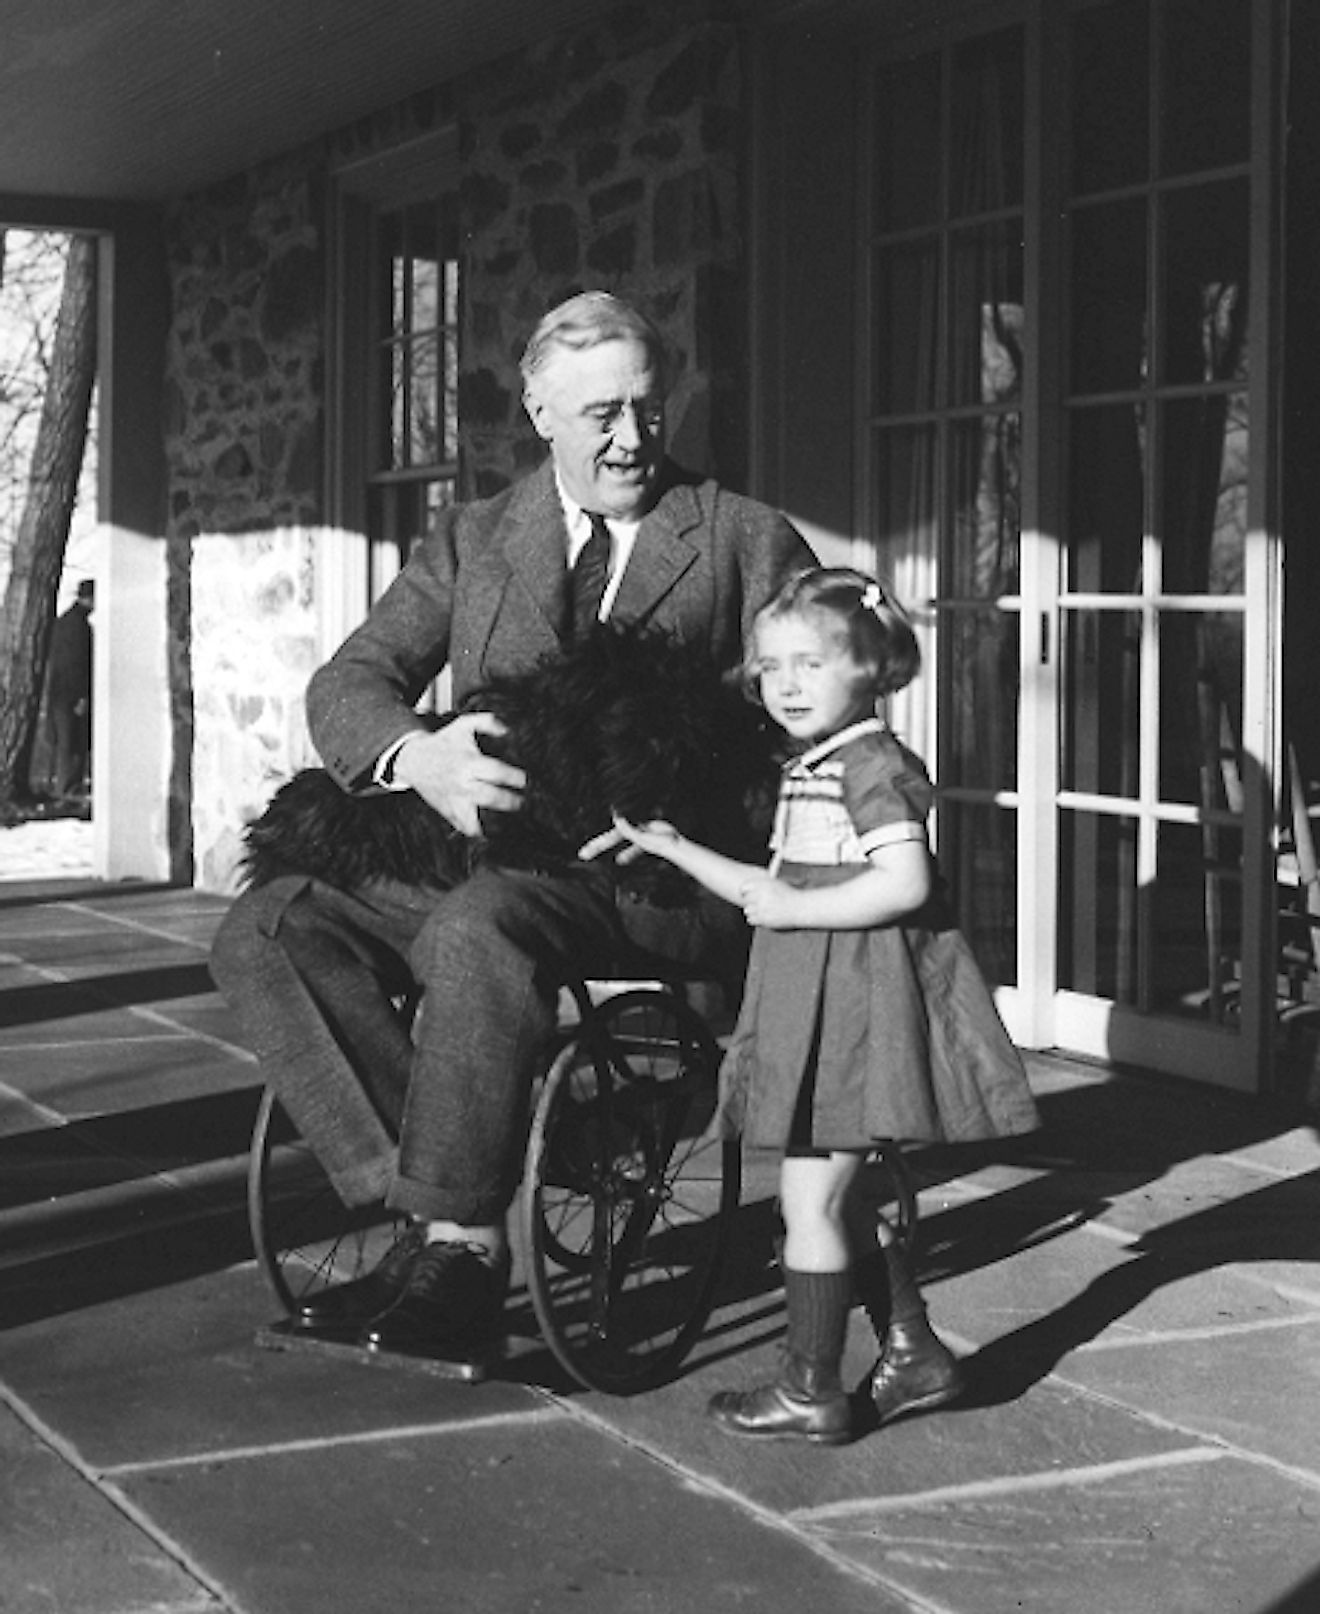 Rare photograph of Roosevelt in a wheelchair, with Fala and Ruthie Bie, the daughter of caretakers at his Hyde Park estate. Image credit: Margaret Suckley/Public domain 